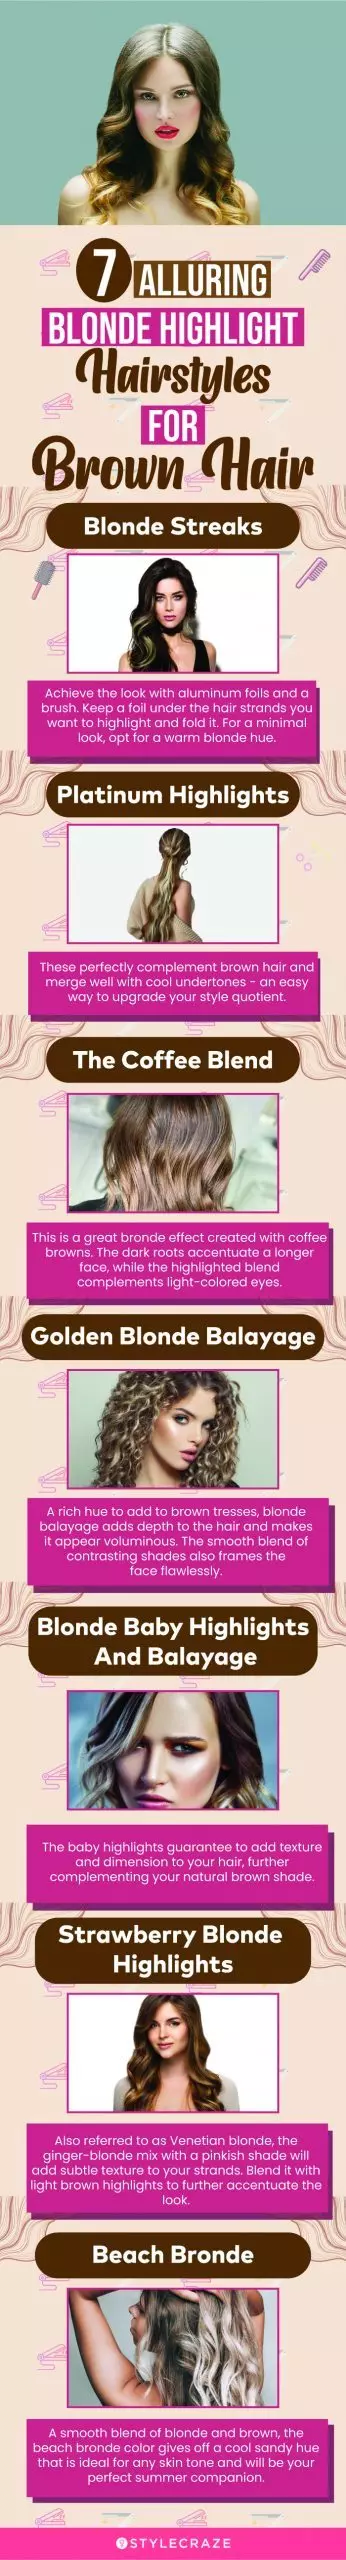 7 alluring blonde highlight hairstyles for brown hair (infographic)